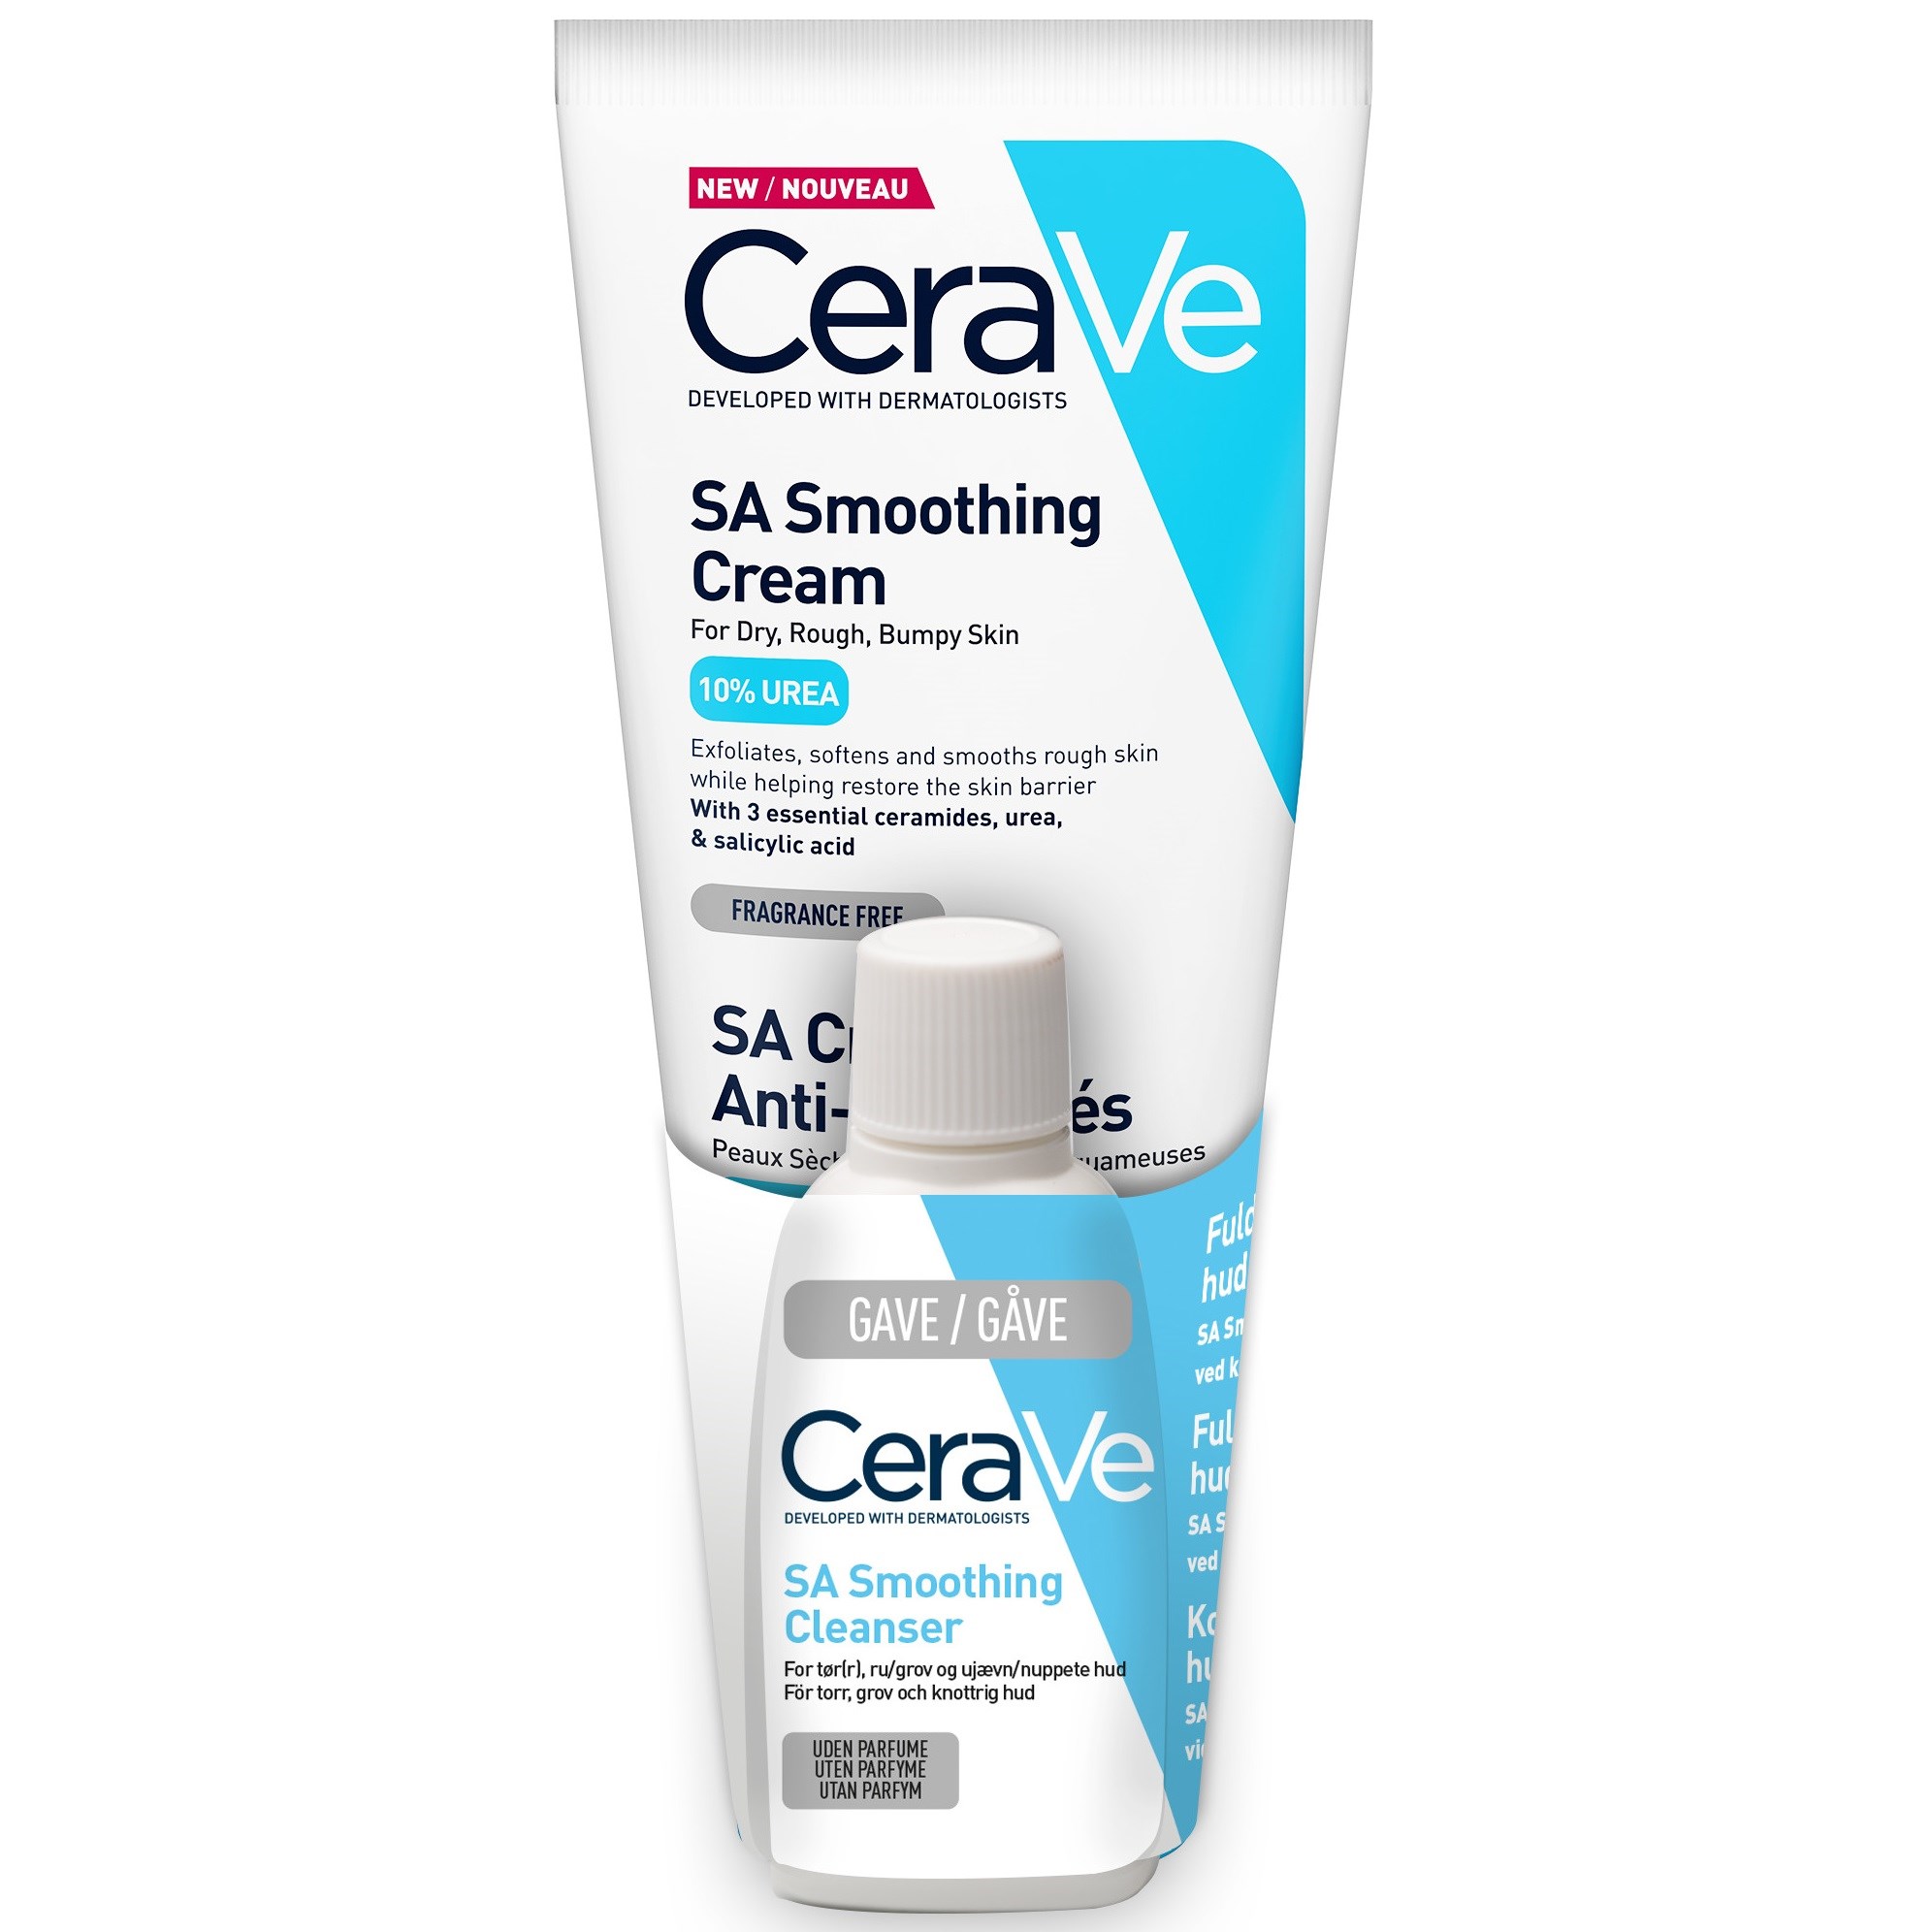 CeraVe SA Smoothing Cream + SA Smoothing Cleanser Bundle